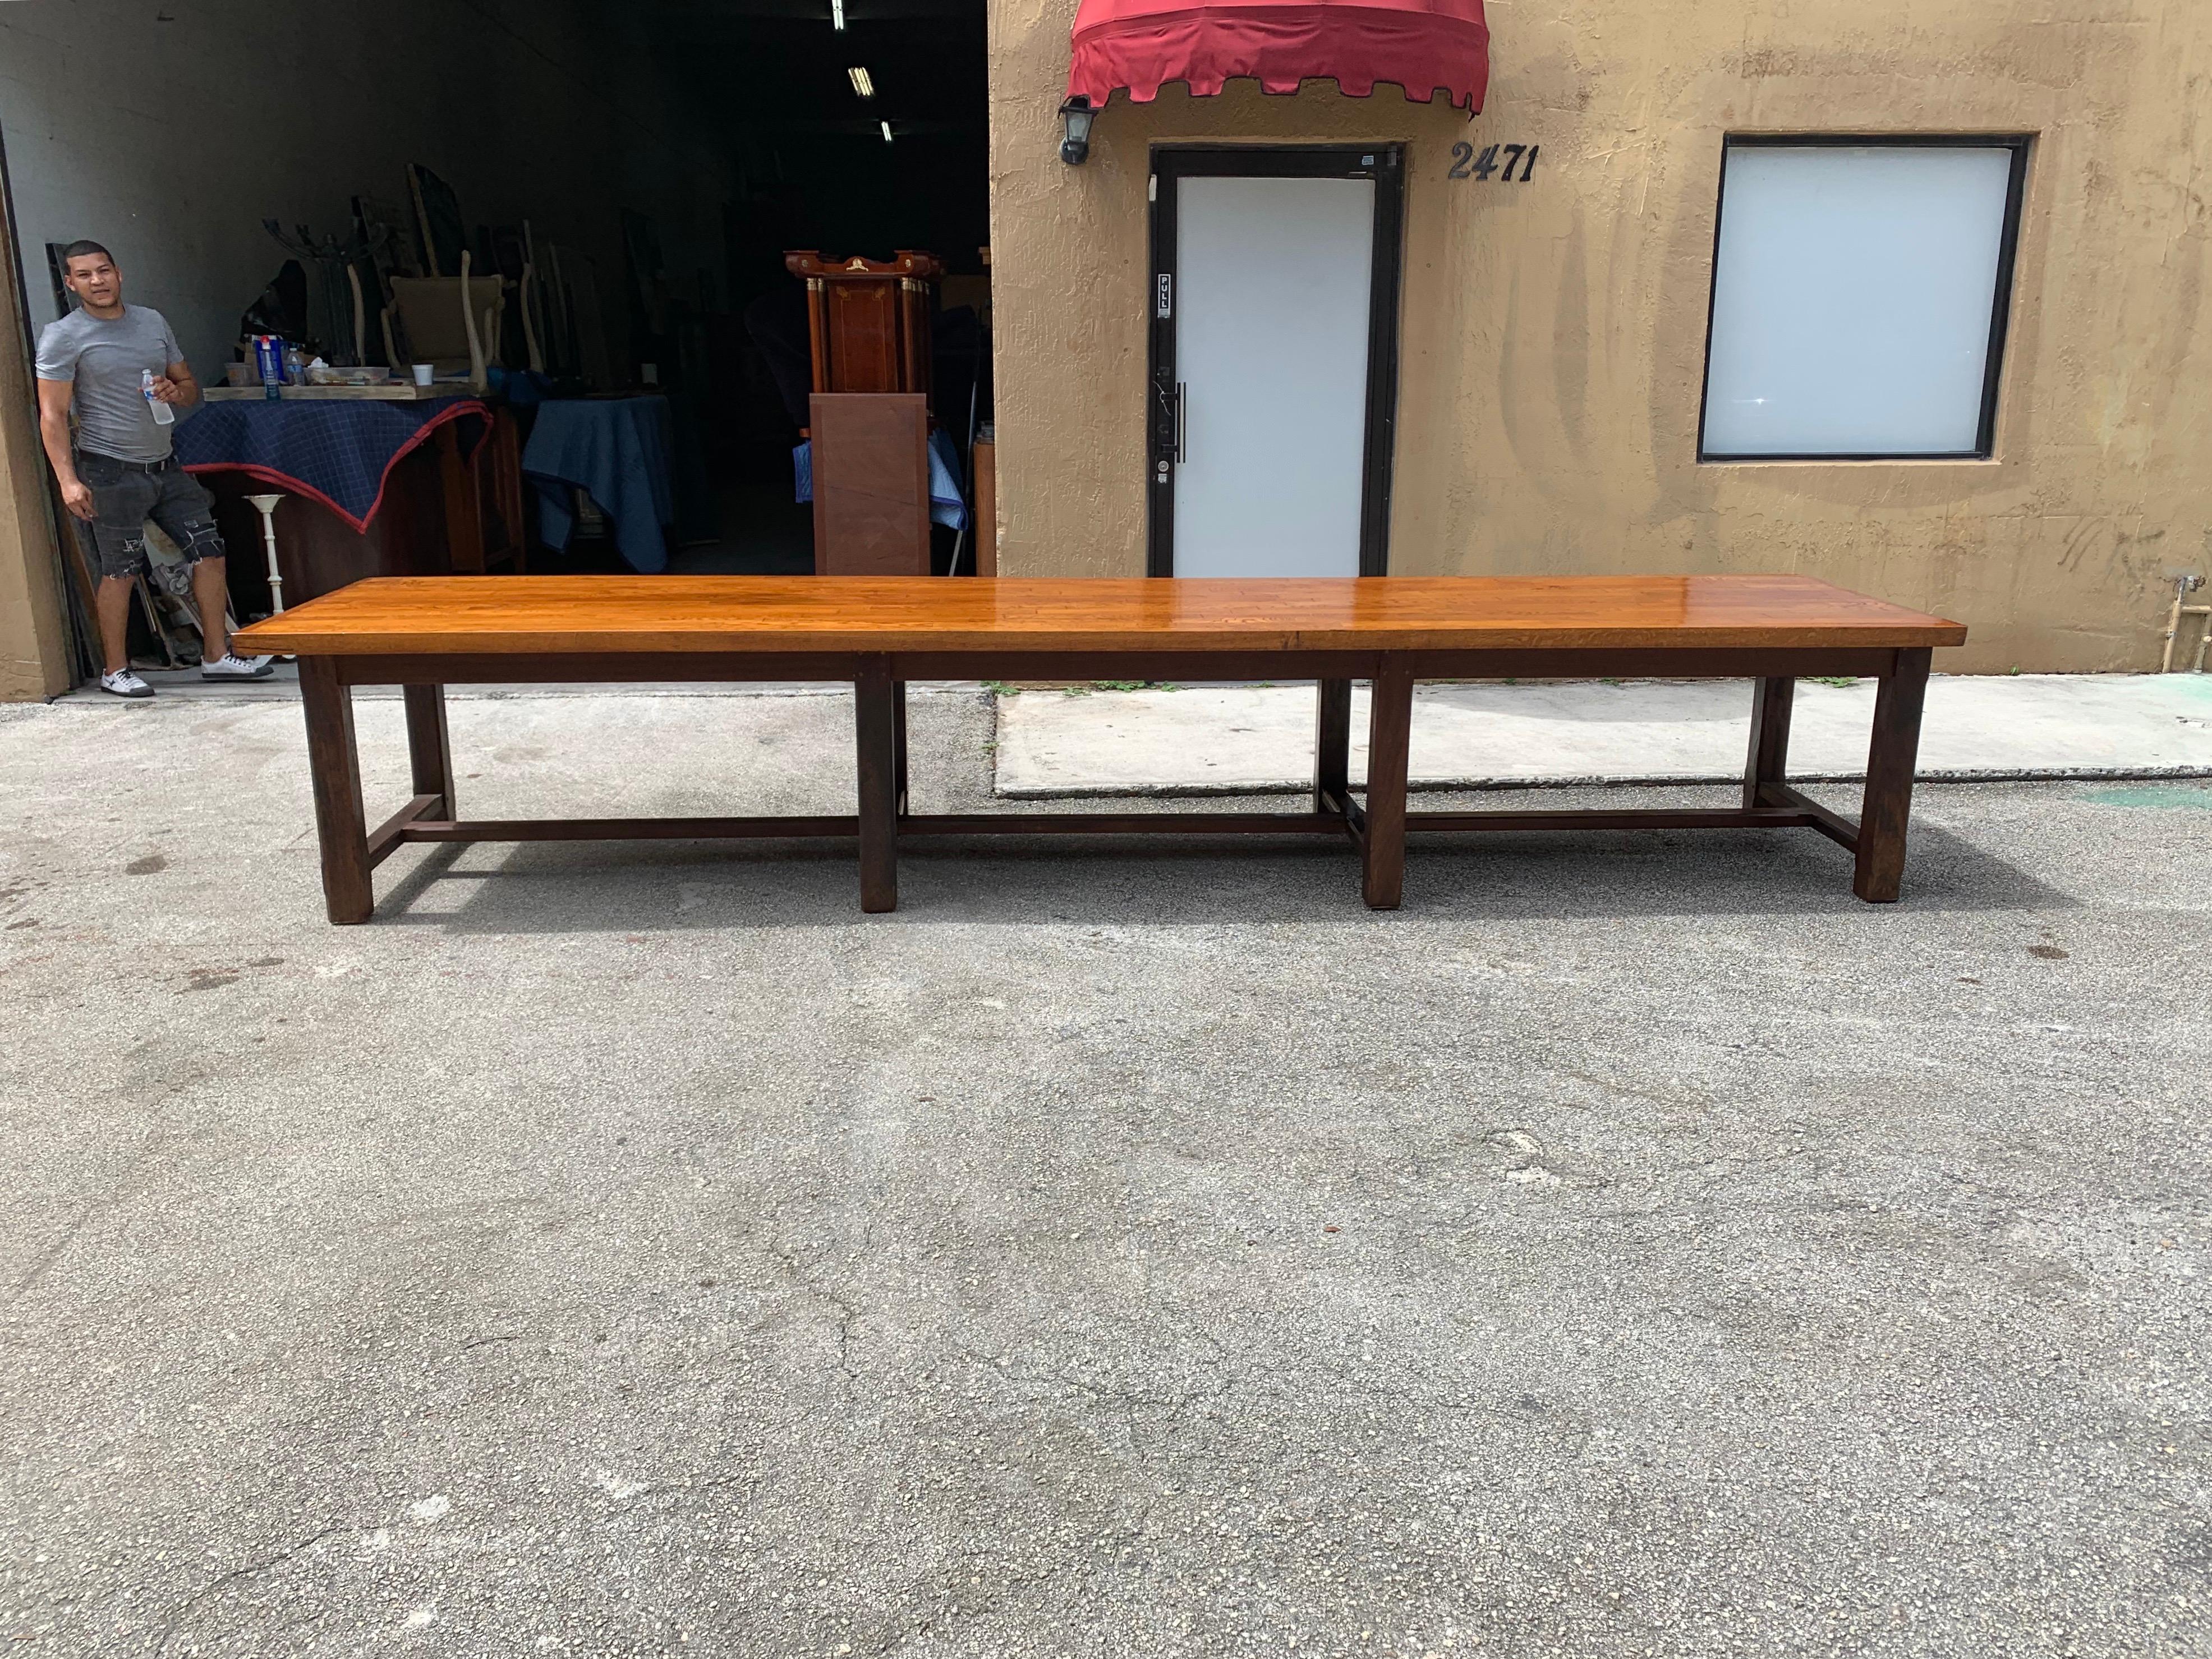 Monumental 19th century rectangular Louis Philippe period chateau farm table or Monastery Table. having a thick plank oak top supported by 8 Square thick legs walnut and joined by 3 H stretcher. This handsome dining table retains its beautiful rich,